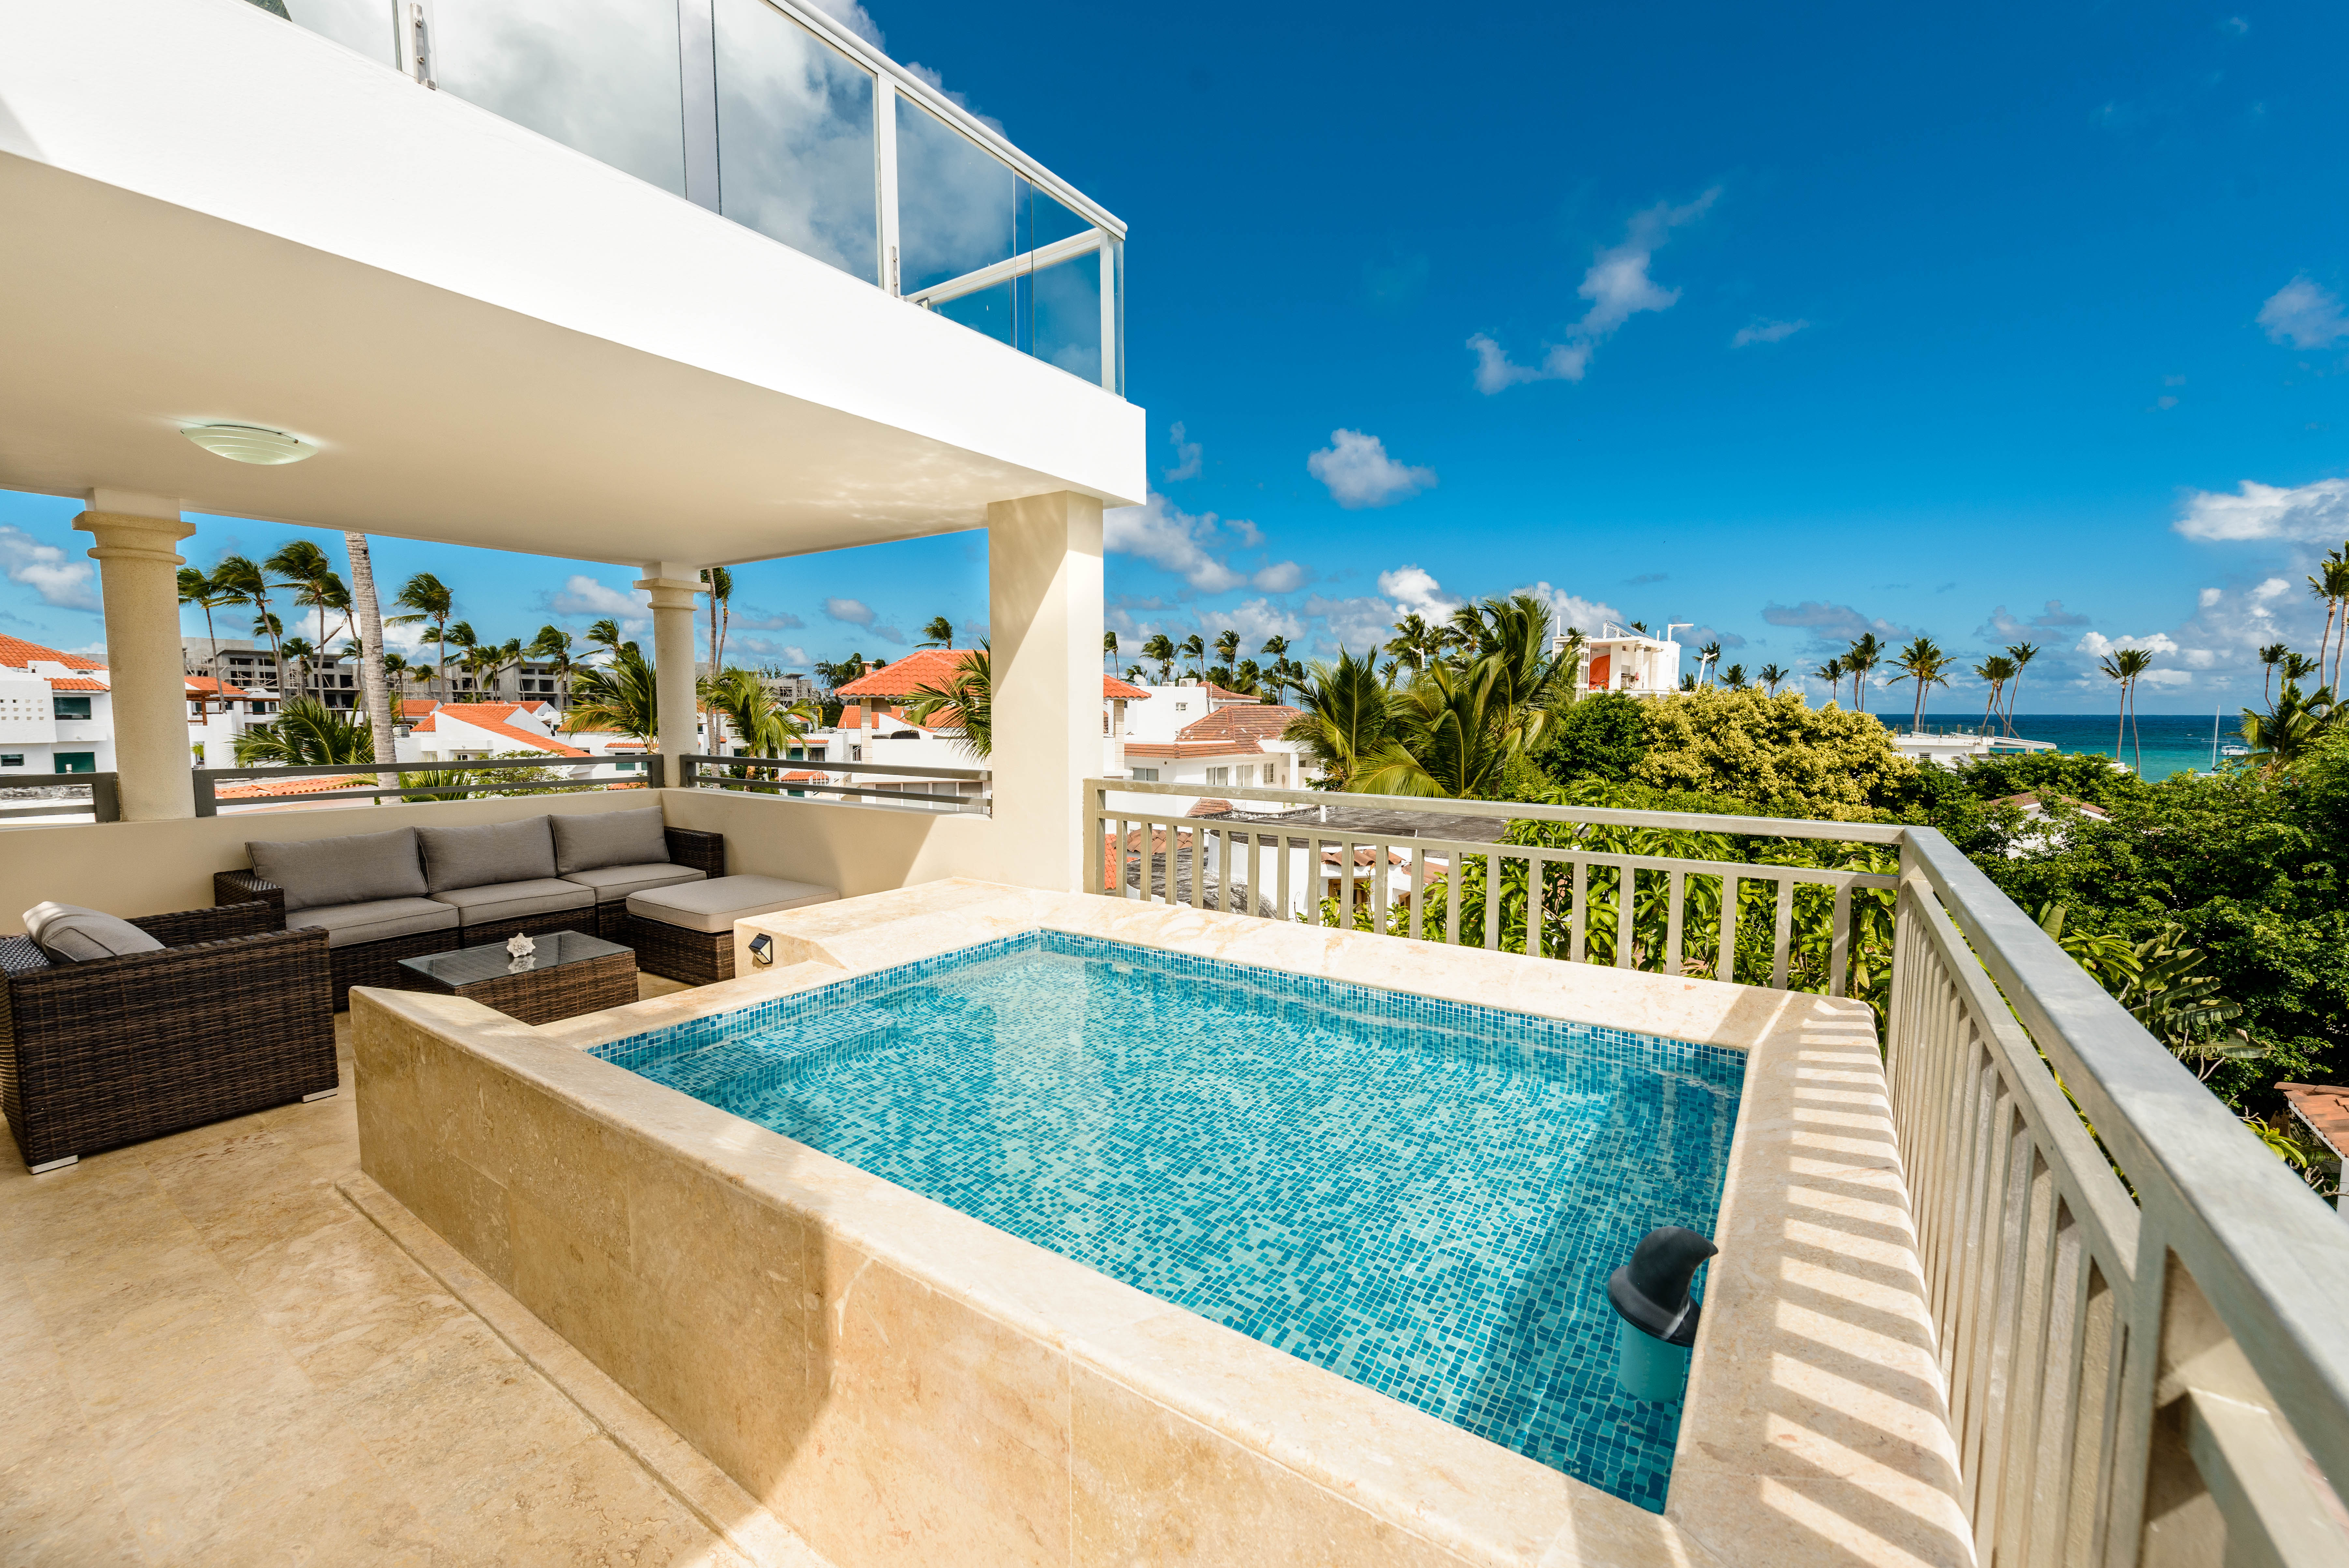 Ocean View 3 Bedrooms Penthouse, Beach Access, Capacity For 8 People. Bavaro. Dominican Republic